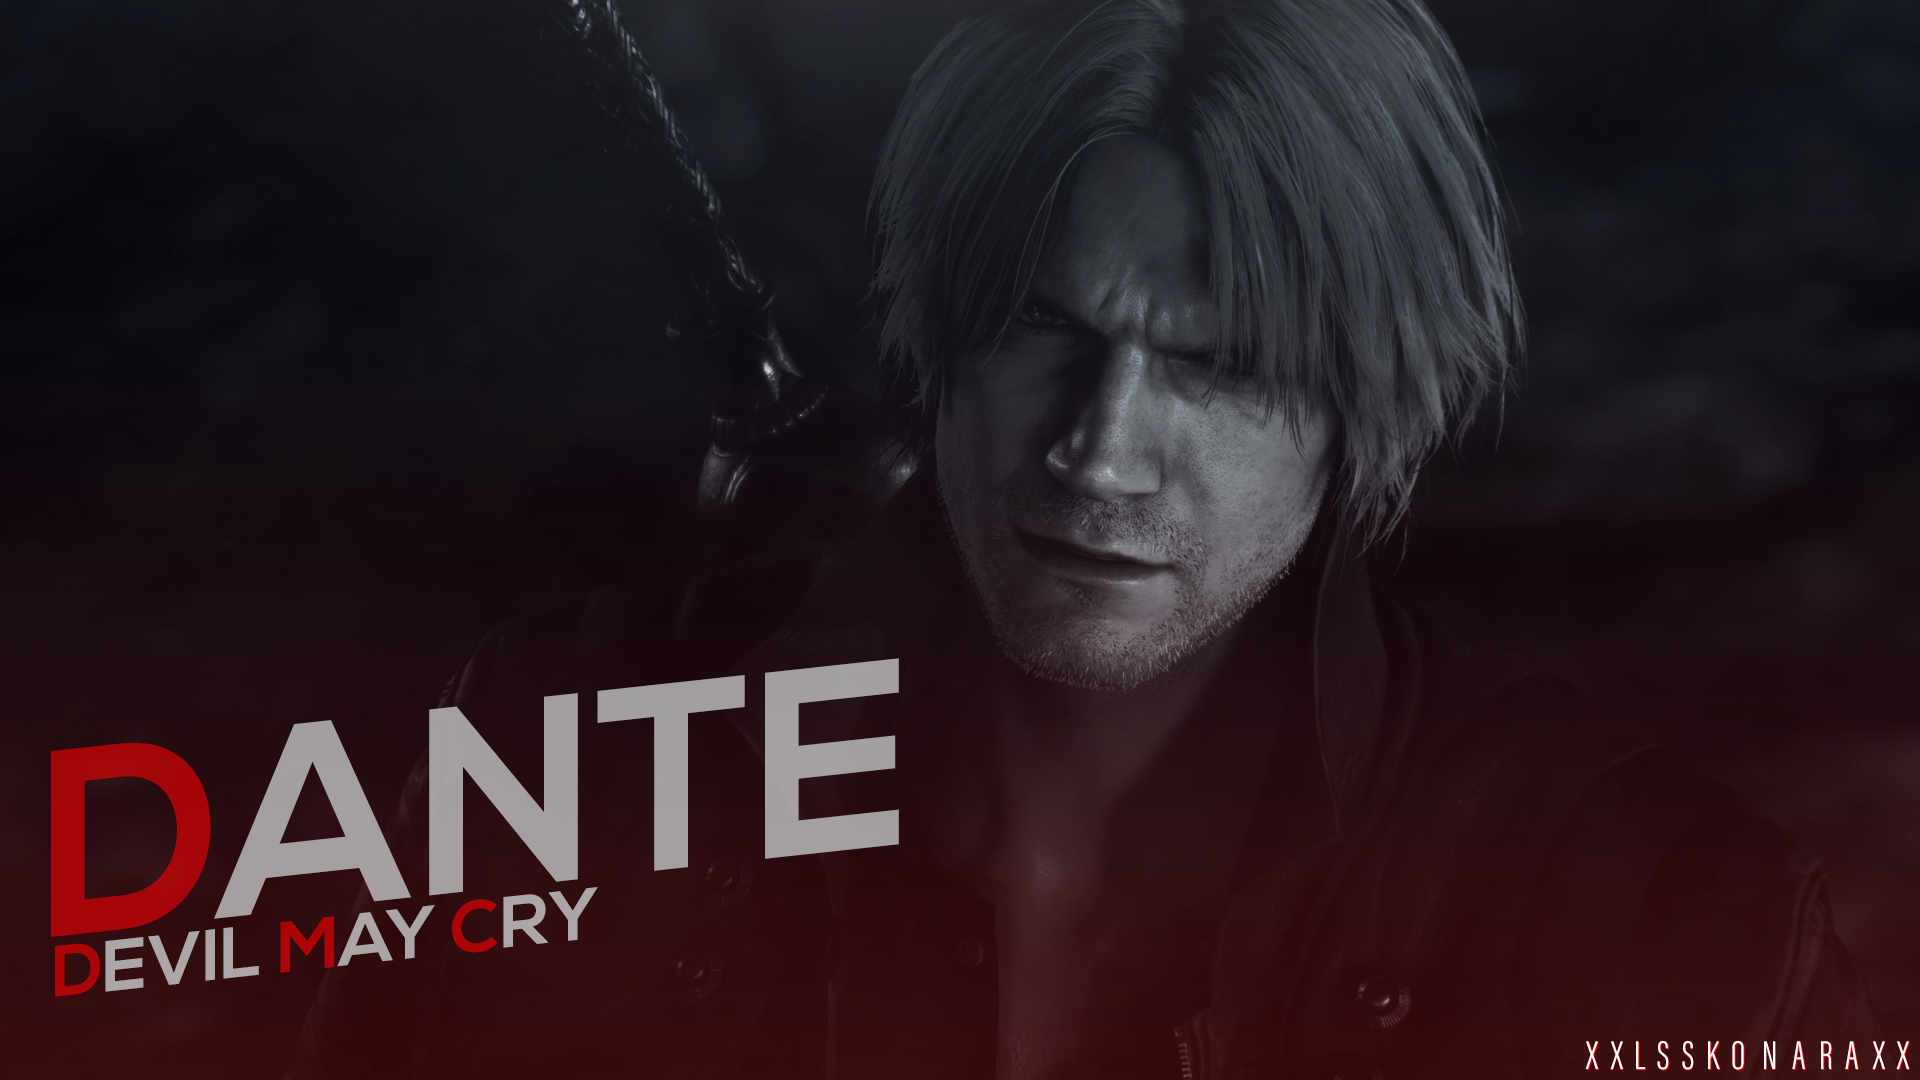 Dante - Devil May Cry 5 May Cry Wallpaper